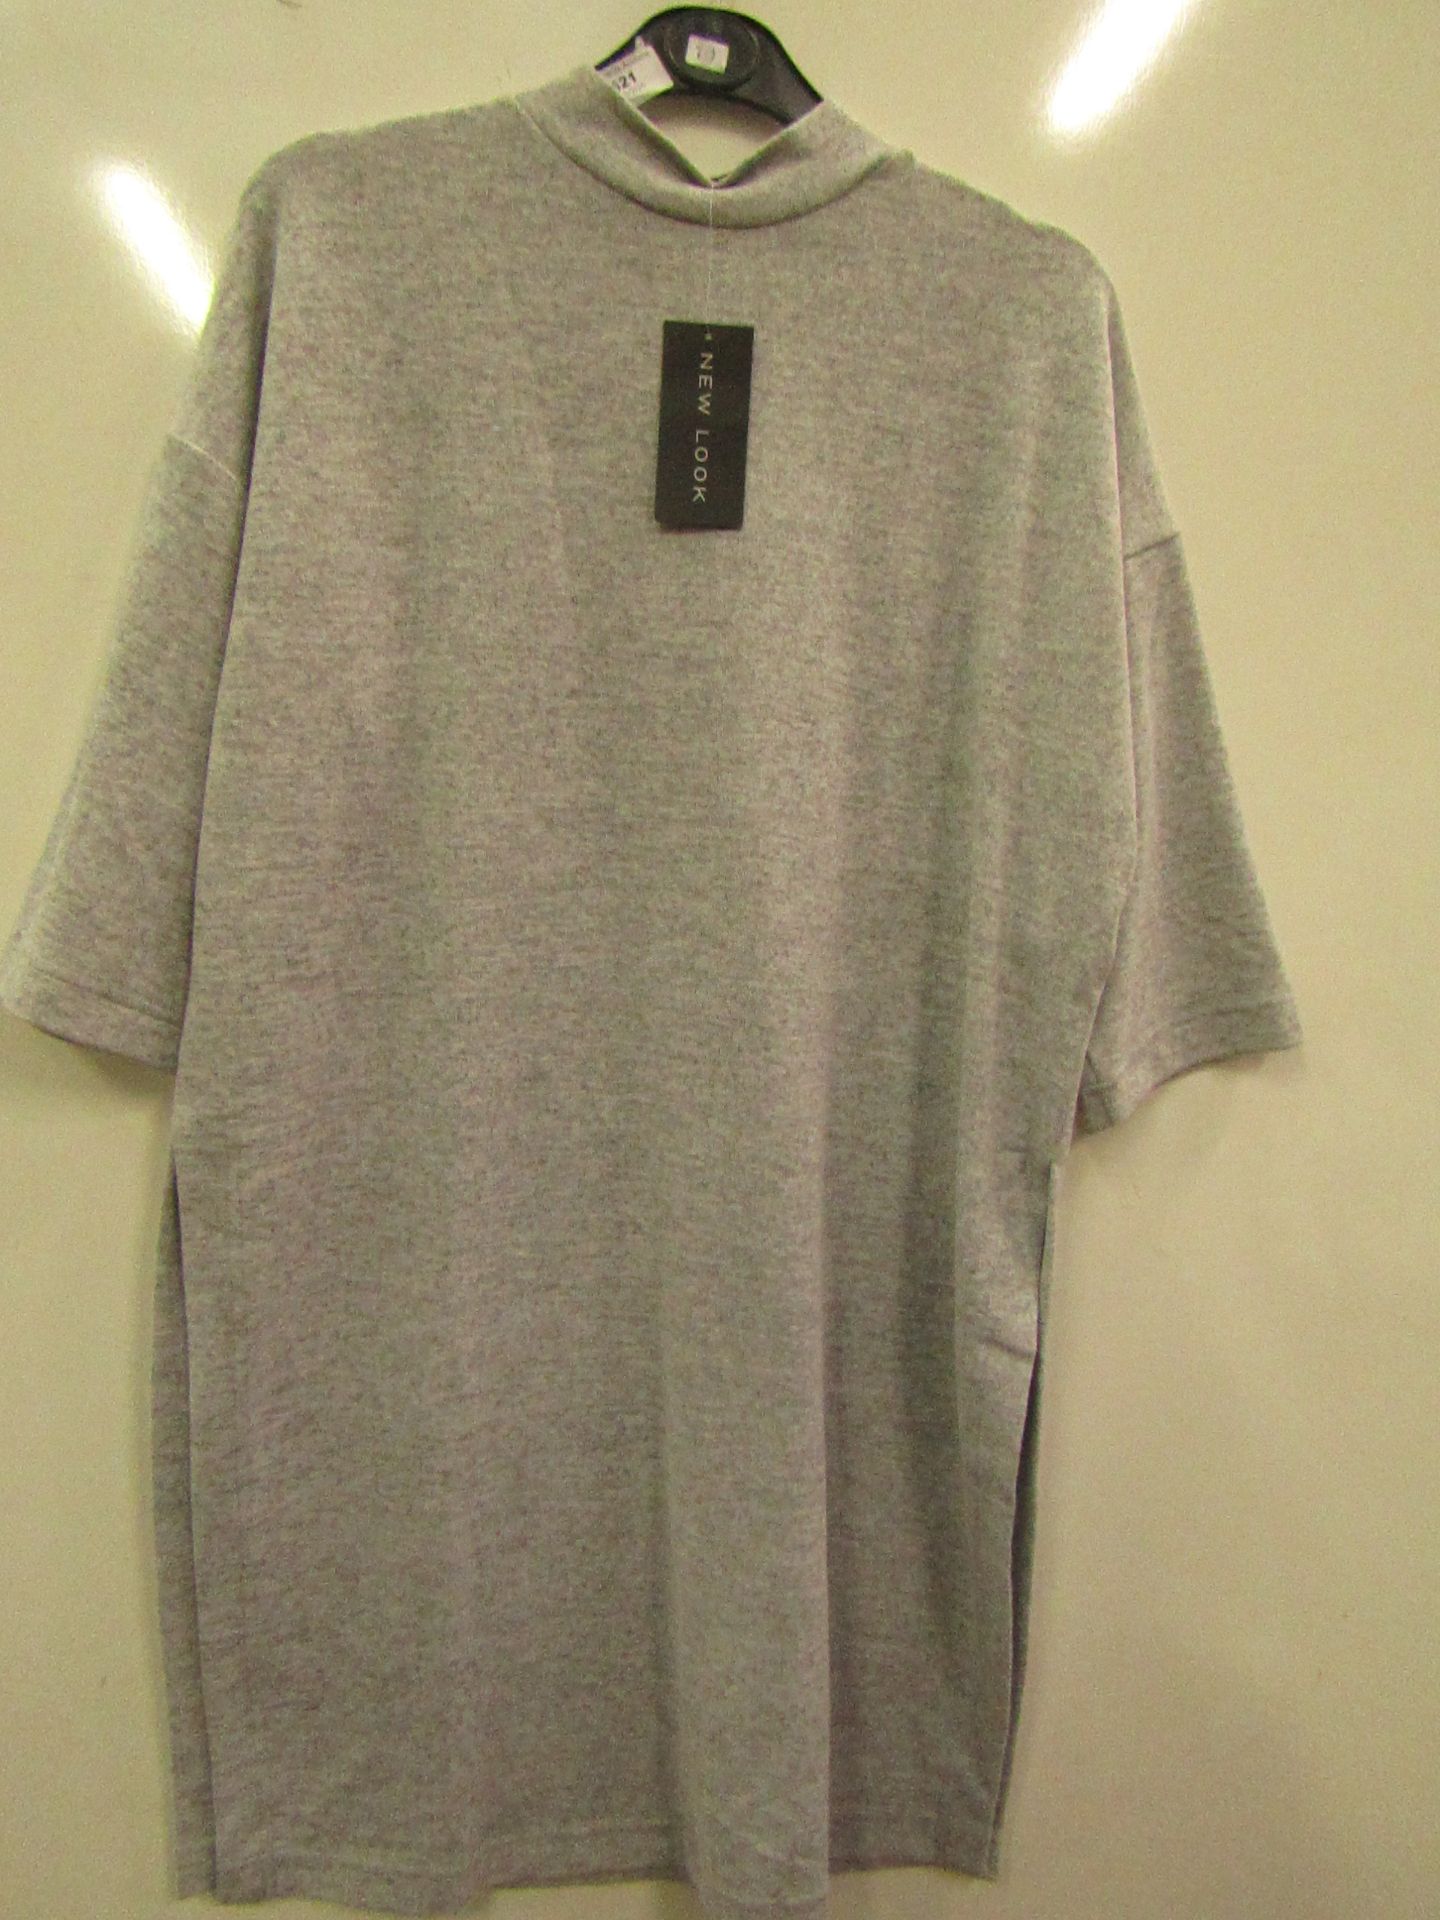 New Look Ladies Longline Brushed Grey Top size M new with tag